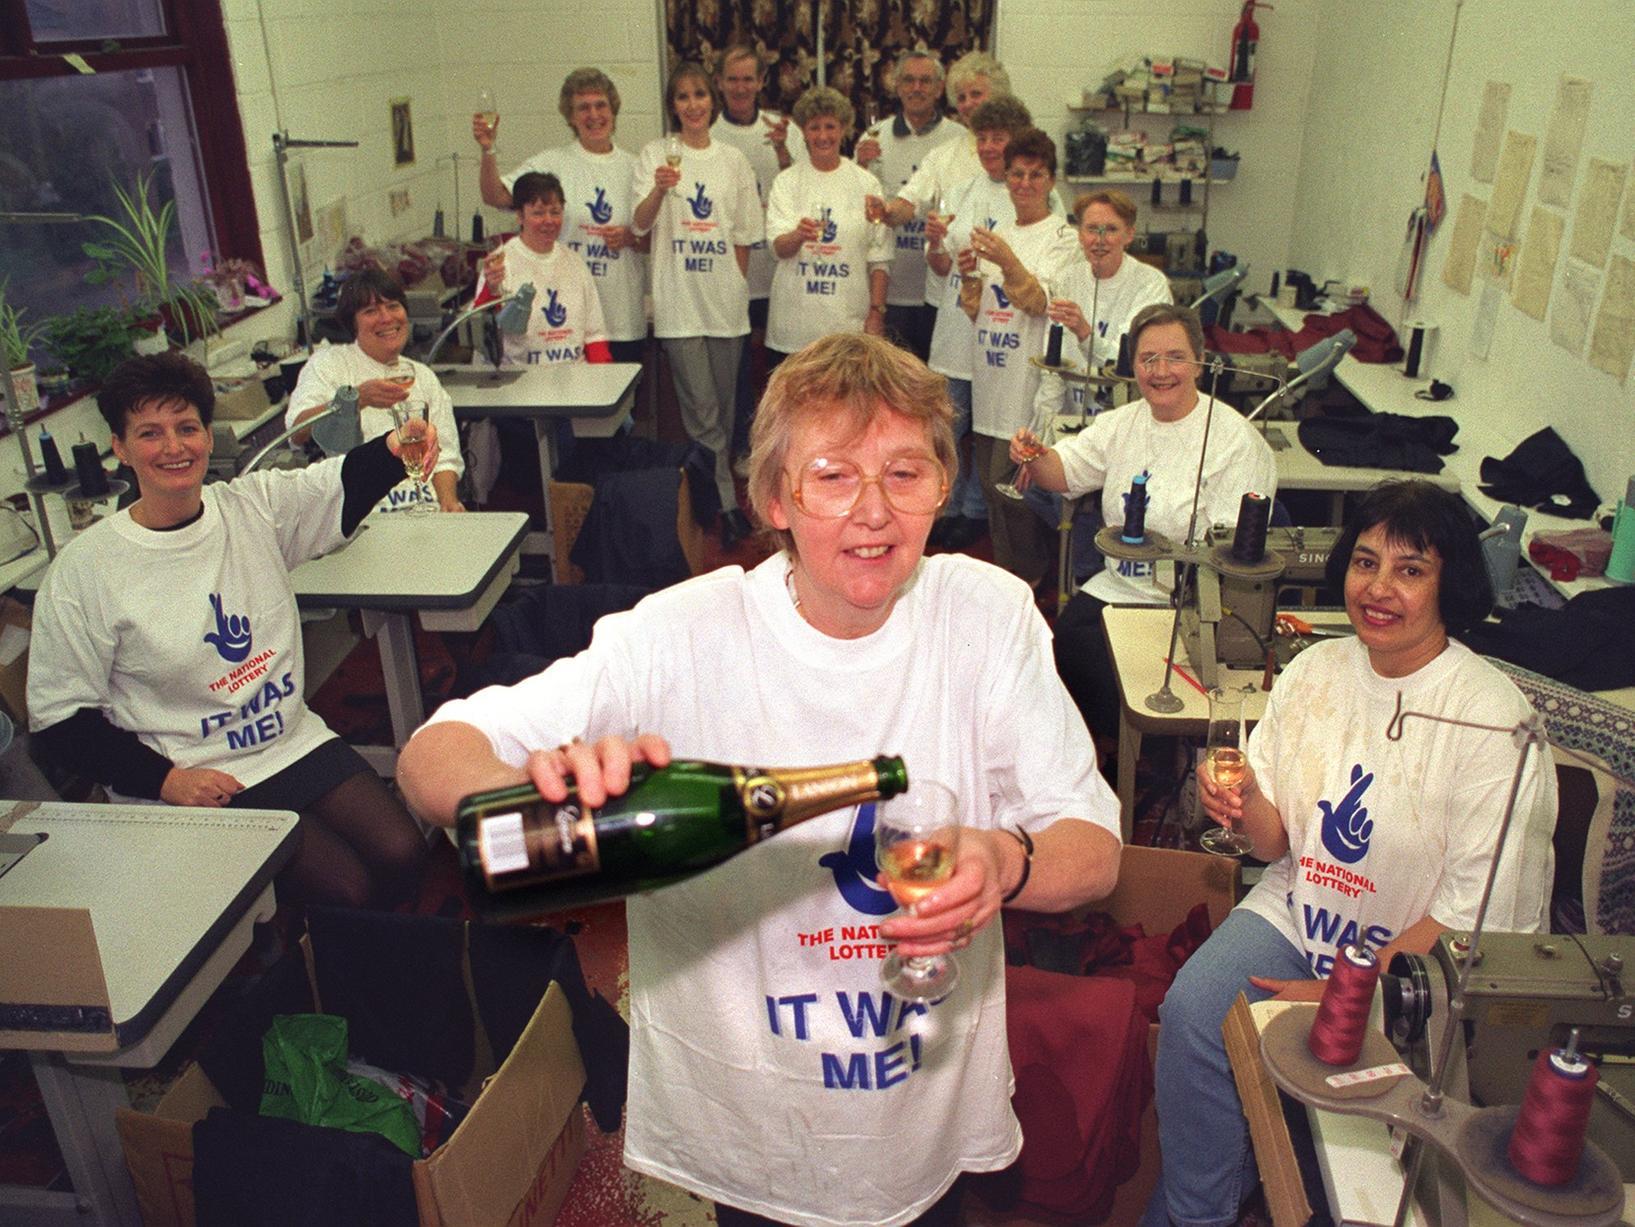 December 1997 and syndicate leader, Eileen Johnson, pours the drinks for her colleagues after M & E Johnson workers scooped more than £100,000 on The National Lottery.